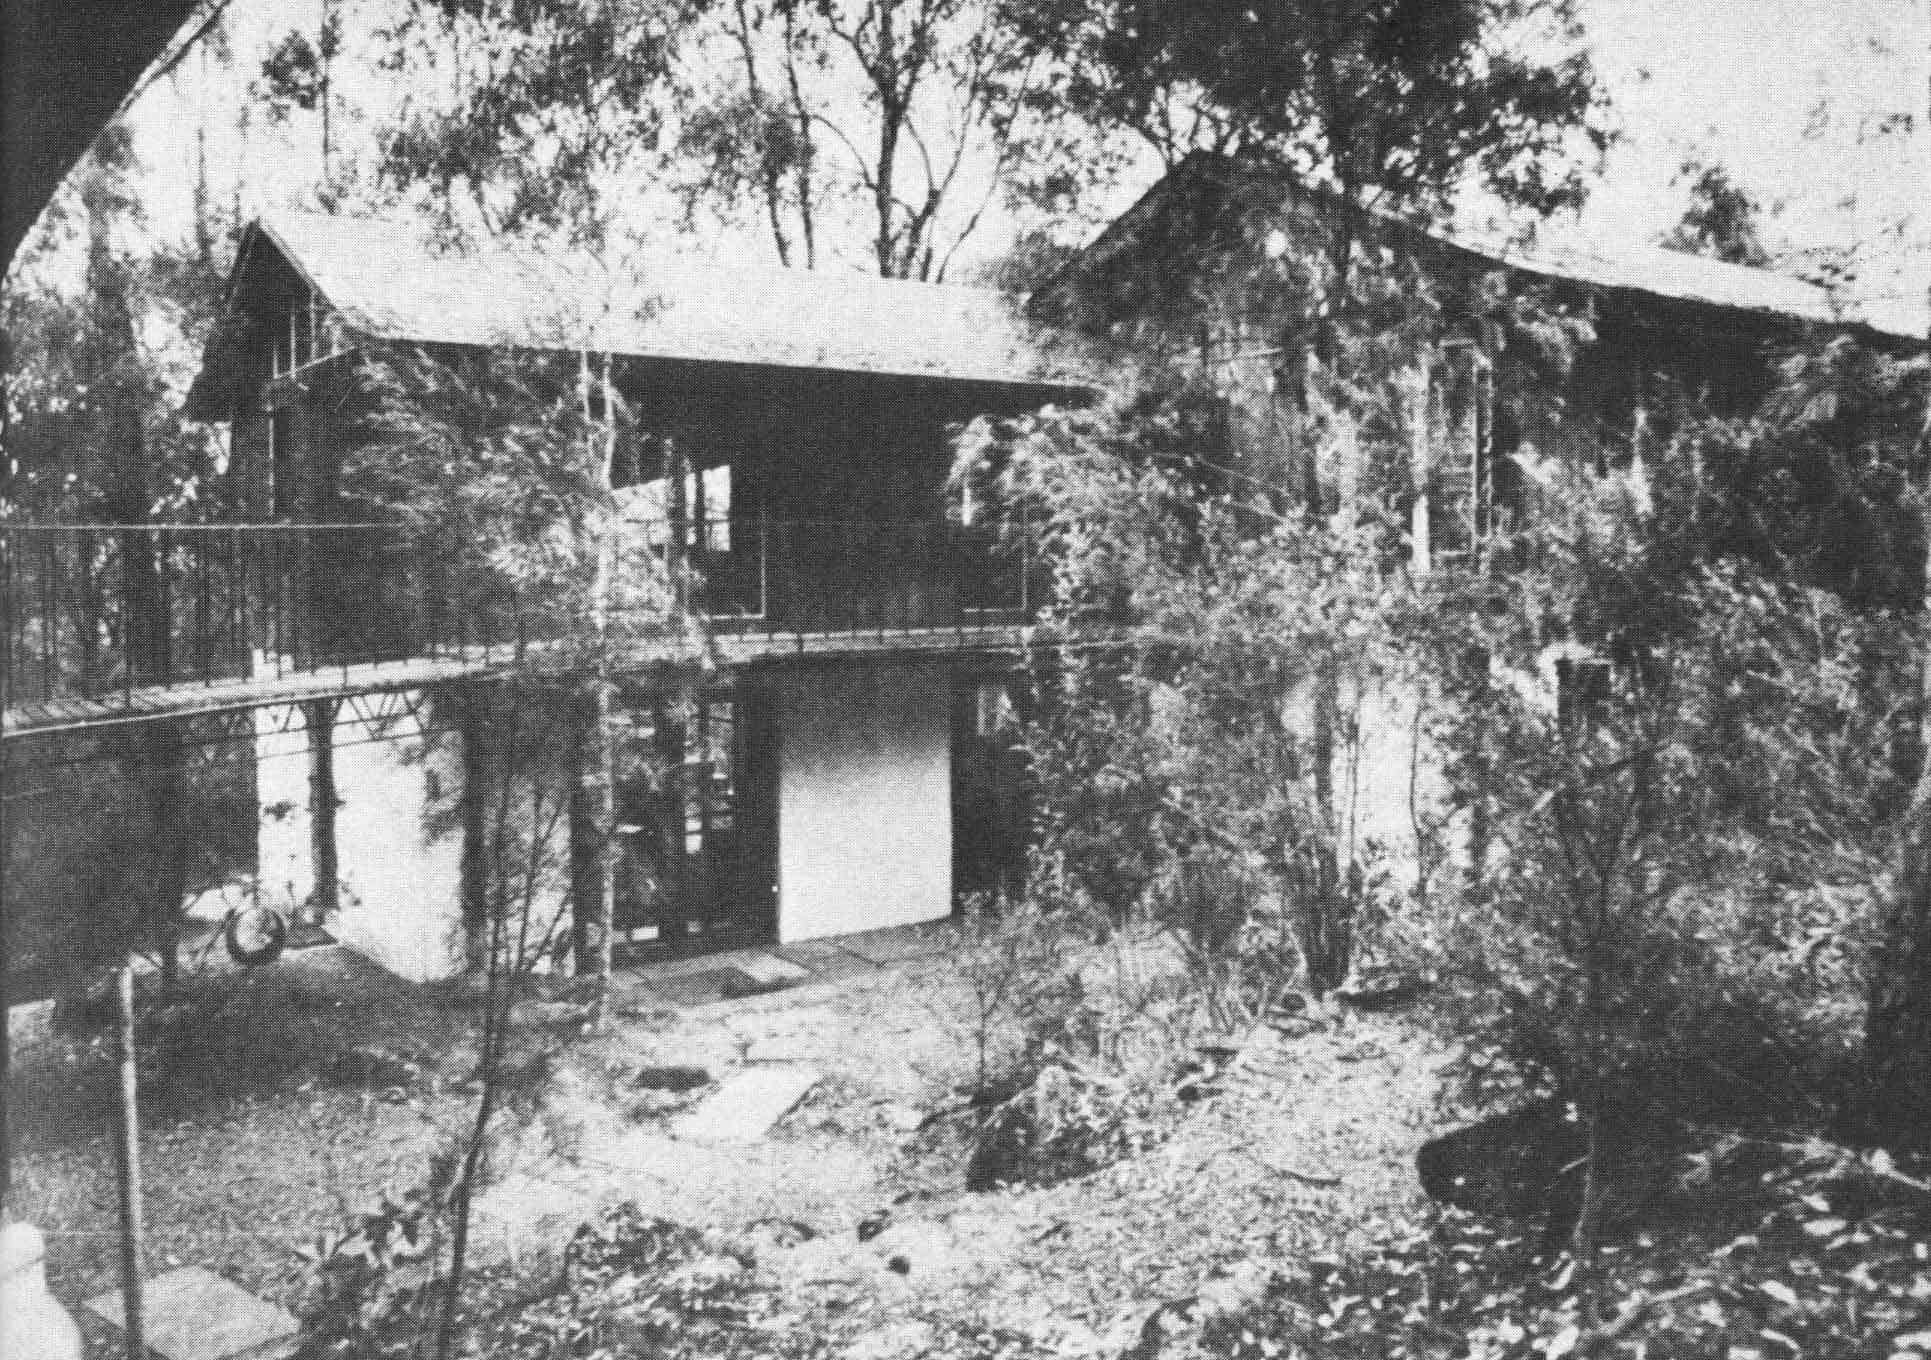 Downing Le Gallienne House Eltham 1948